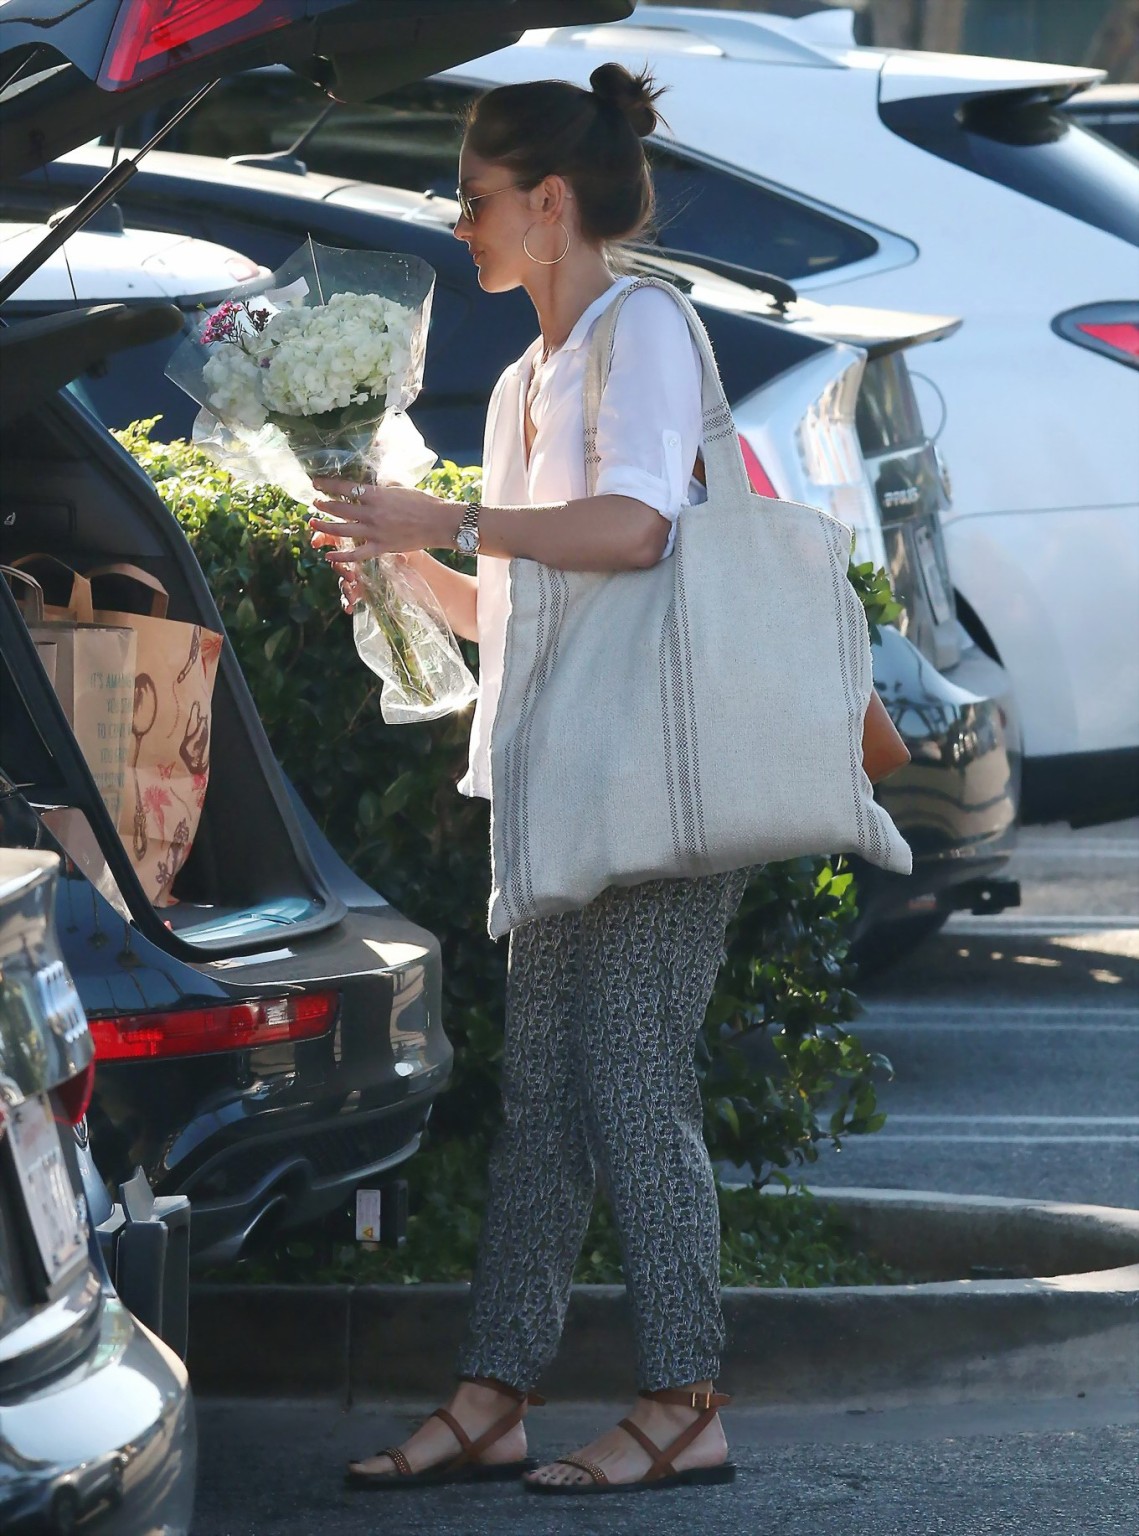 Minka Kelly showing pokies in white slightly transparent shirt while shopping in #75170747